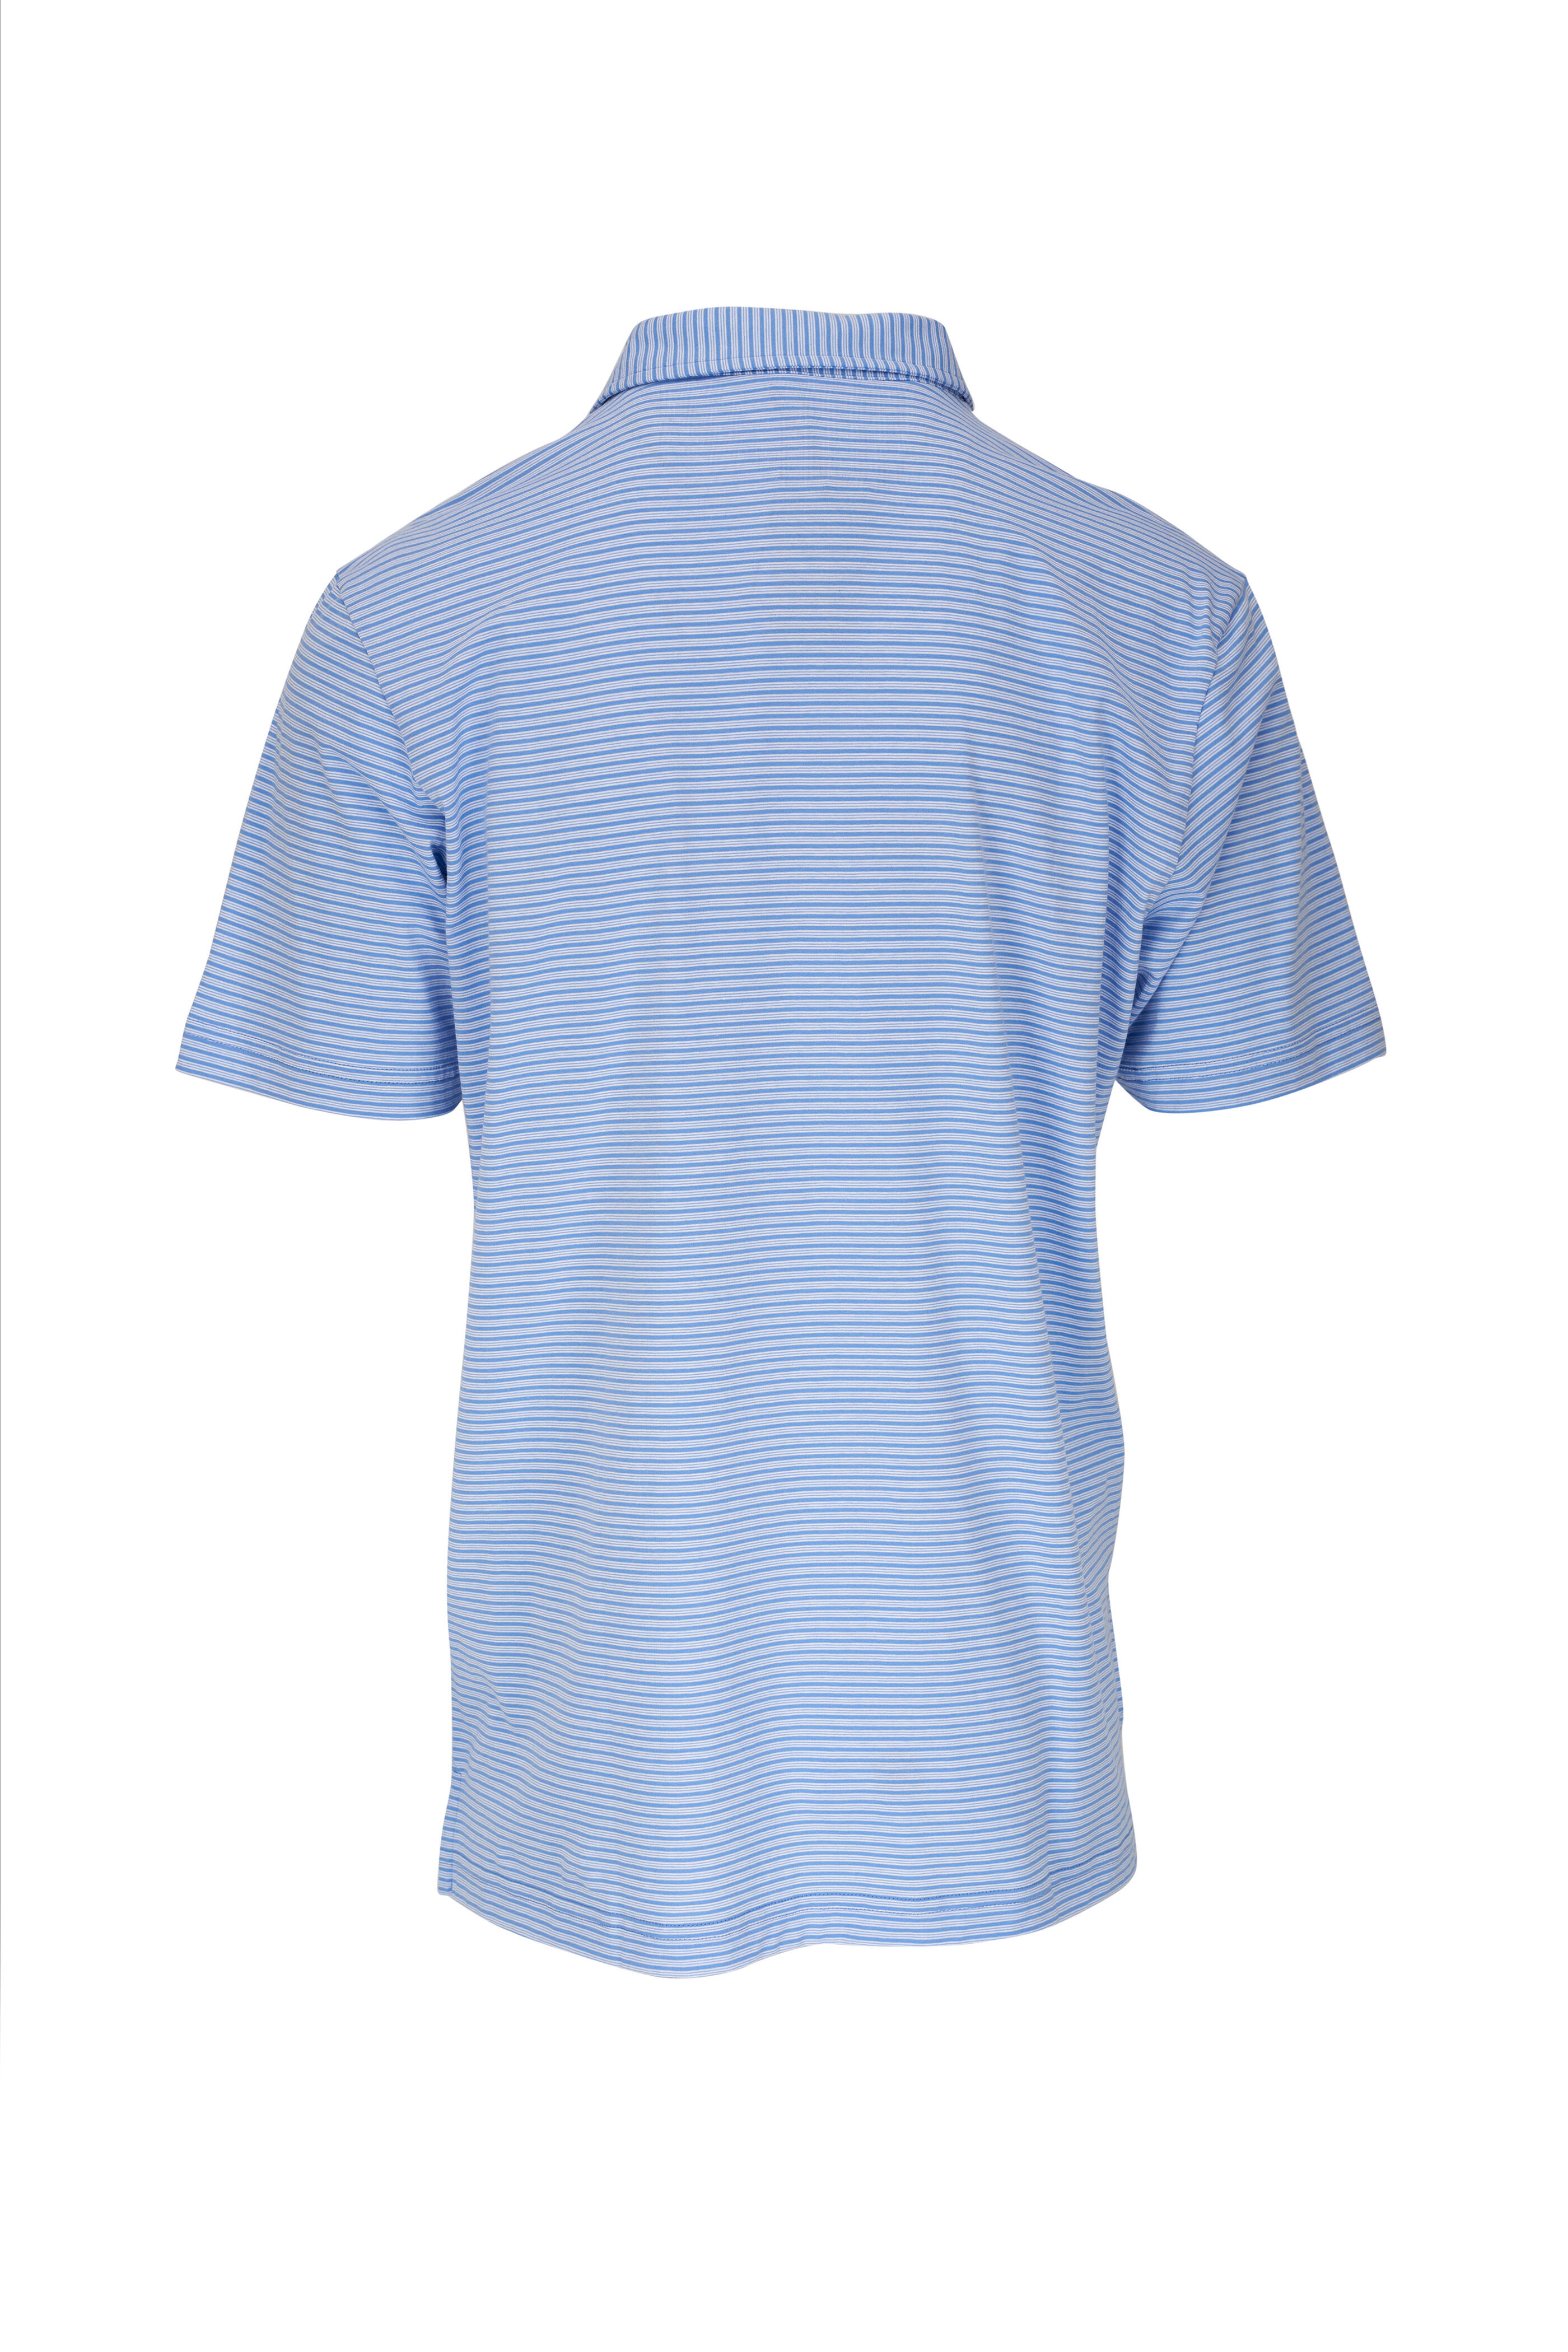 Peter Millar - Crown Comfort Maritime Blue & White Striped Polo